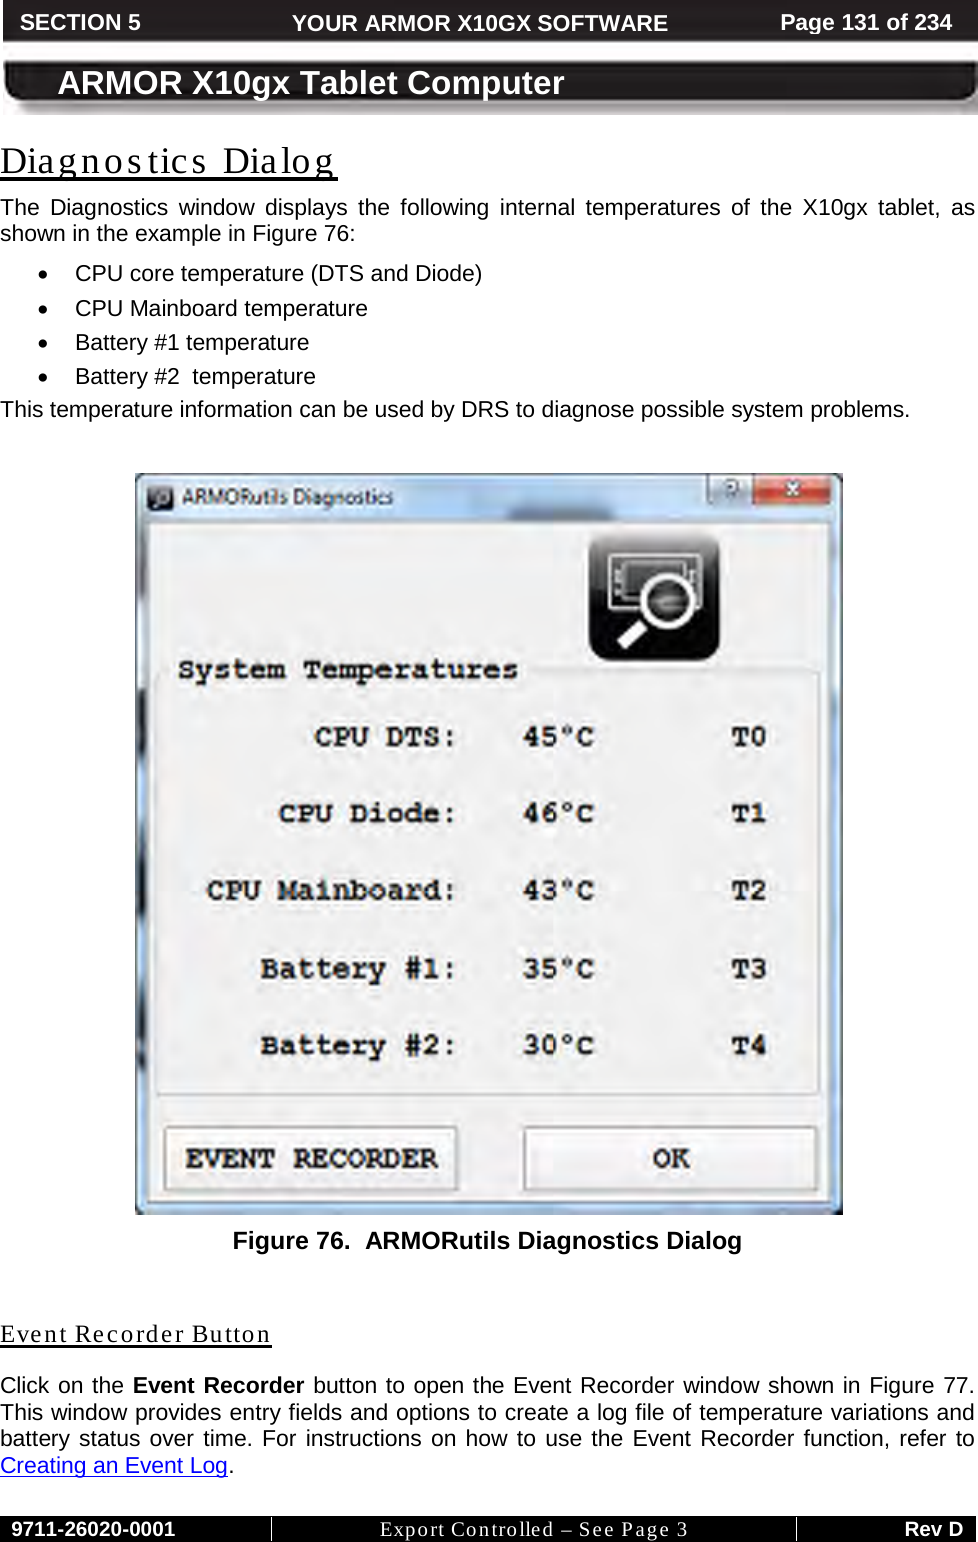     9711-26020-0001 Export Controlled – See Page 3 Rev D SECTION 5 YOUR ARMOR X10GX SOFTWARE Page 131 of 234  ARMOR X10gx Tablet Computer Diagnos tics  Dialog The Diagnostics window displays the following internal temperatures of the X10gx tablet, as shown in the example in Figure 76:  • CPU core temperature (DTS and Diode) • CPU Mainboard temperature • Battery #1 temperature  • Battery #2  temperature This temperature information can be used by DRS to diagnose possible system problems.   Figure 76.  ARMORutils Diagnostics Dialog  Event Recorder Button Click on the Event Recorder button to open the Event Recorder window shown in Figure 77. This window provides entry fields and options to create a log file of temperature variations and battery status over time. For instructions on how to use the Event Recorder function, refer to Creating an Event Log. 